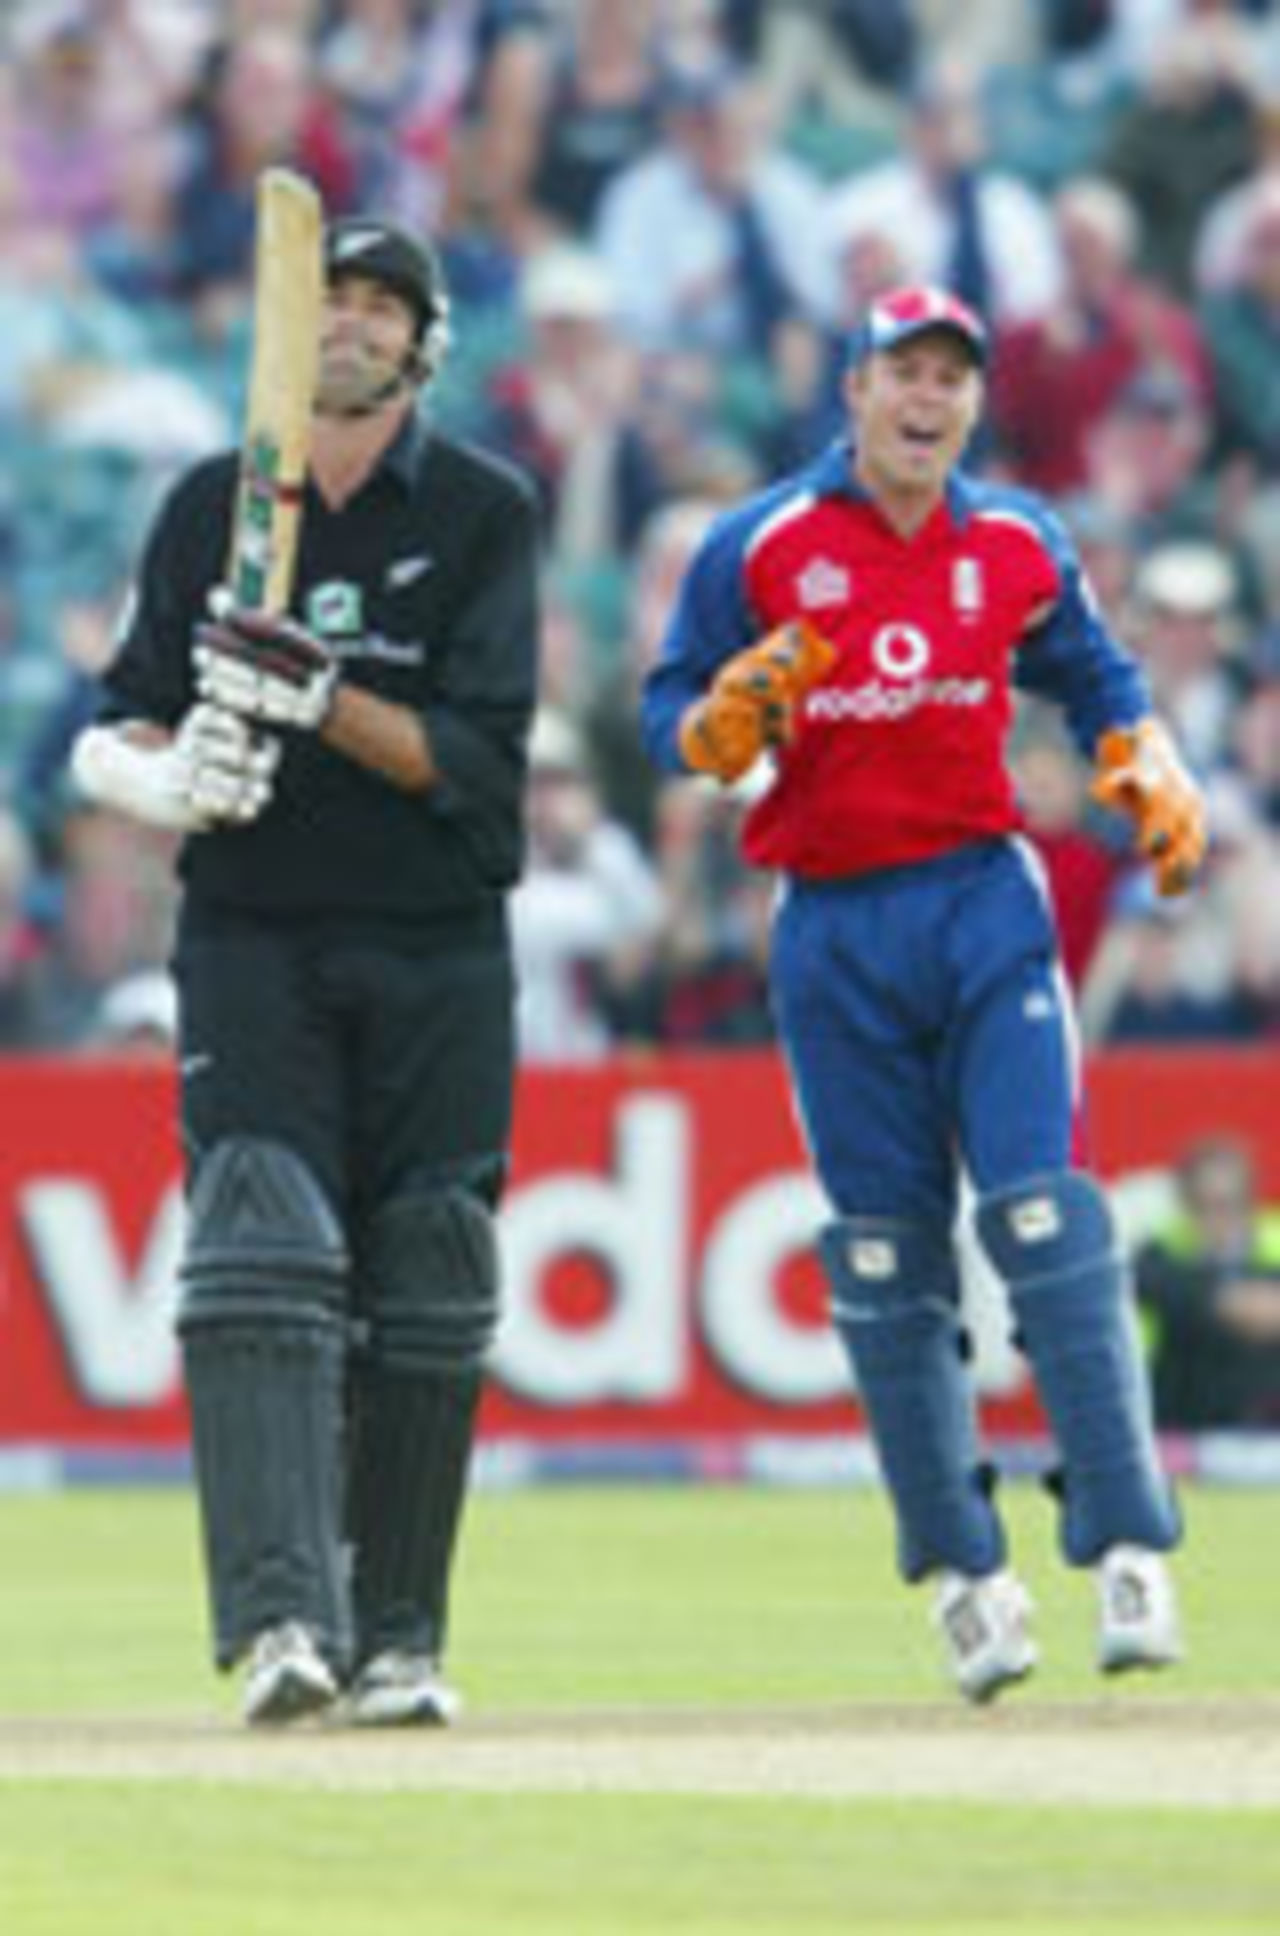 Stephen Fleming is out for 99, England v New Zealand, NatWest Series, Bristol, July 4, 2004